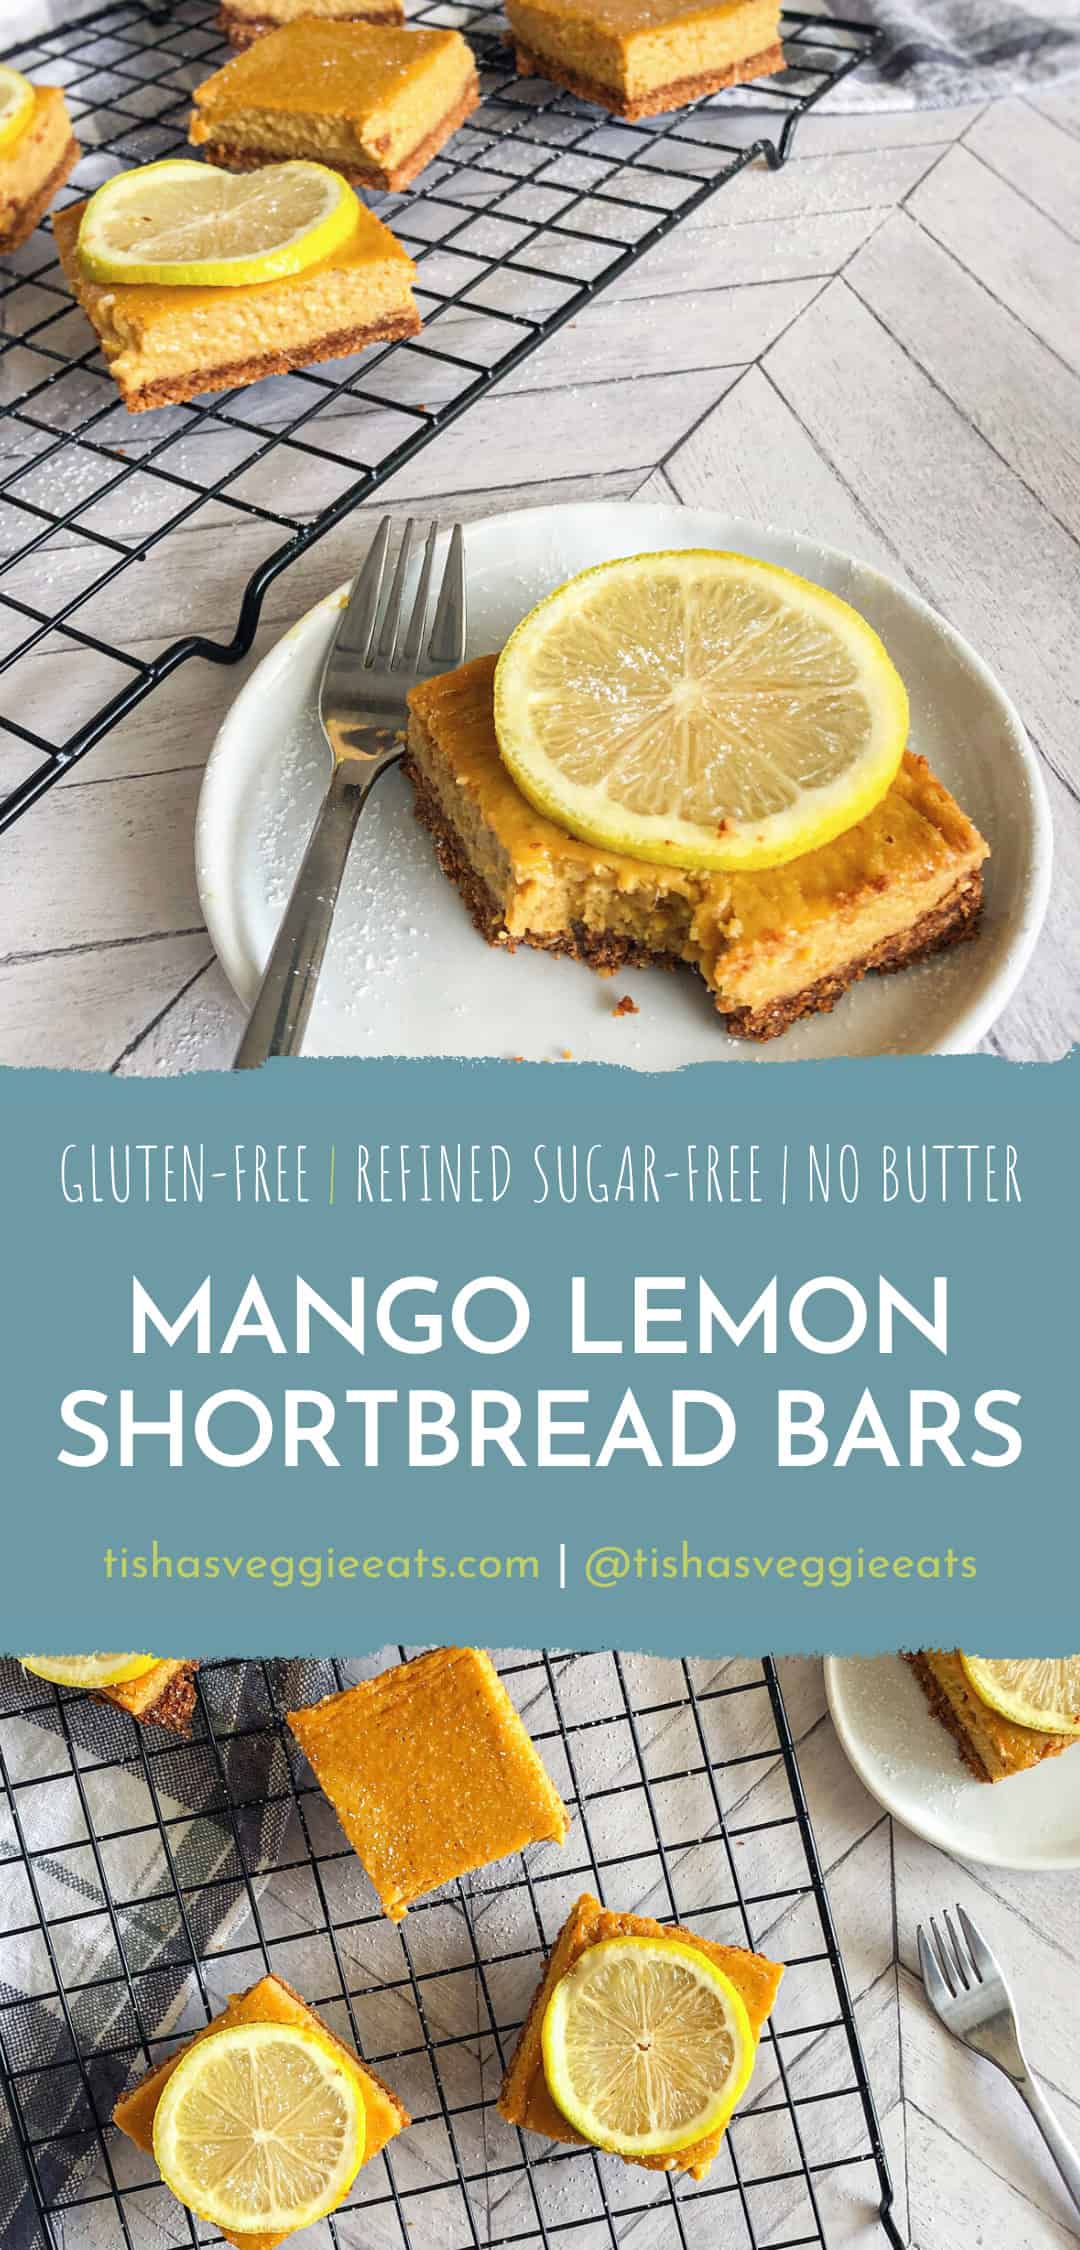 mango lemon shortbread bar in small white plate with lemon slice on top and bars on cooling rack in background pinterest image